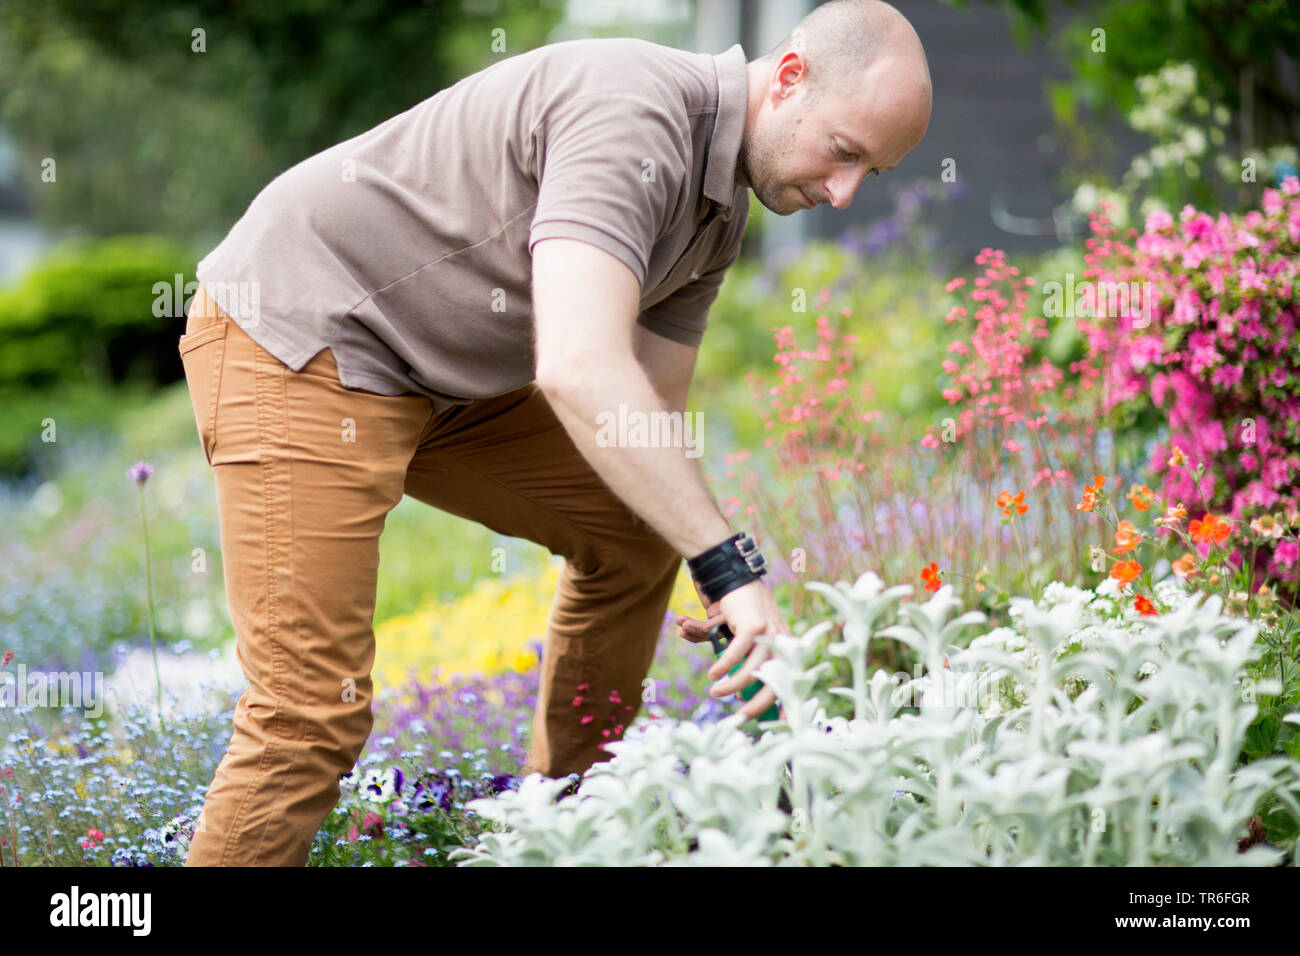 man gardening at a blooming flowerbed, Germany Stock Photo